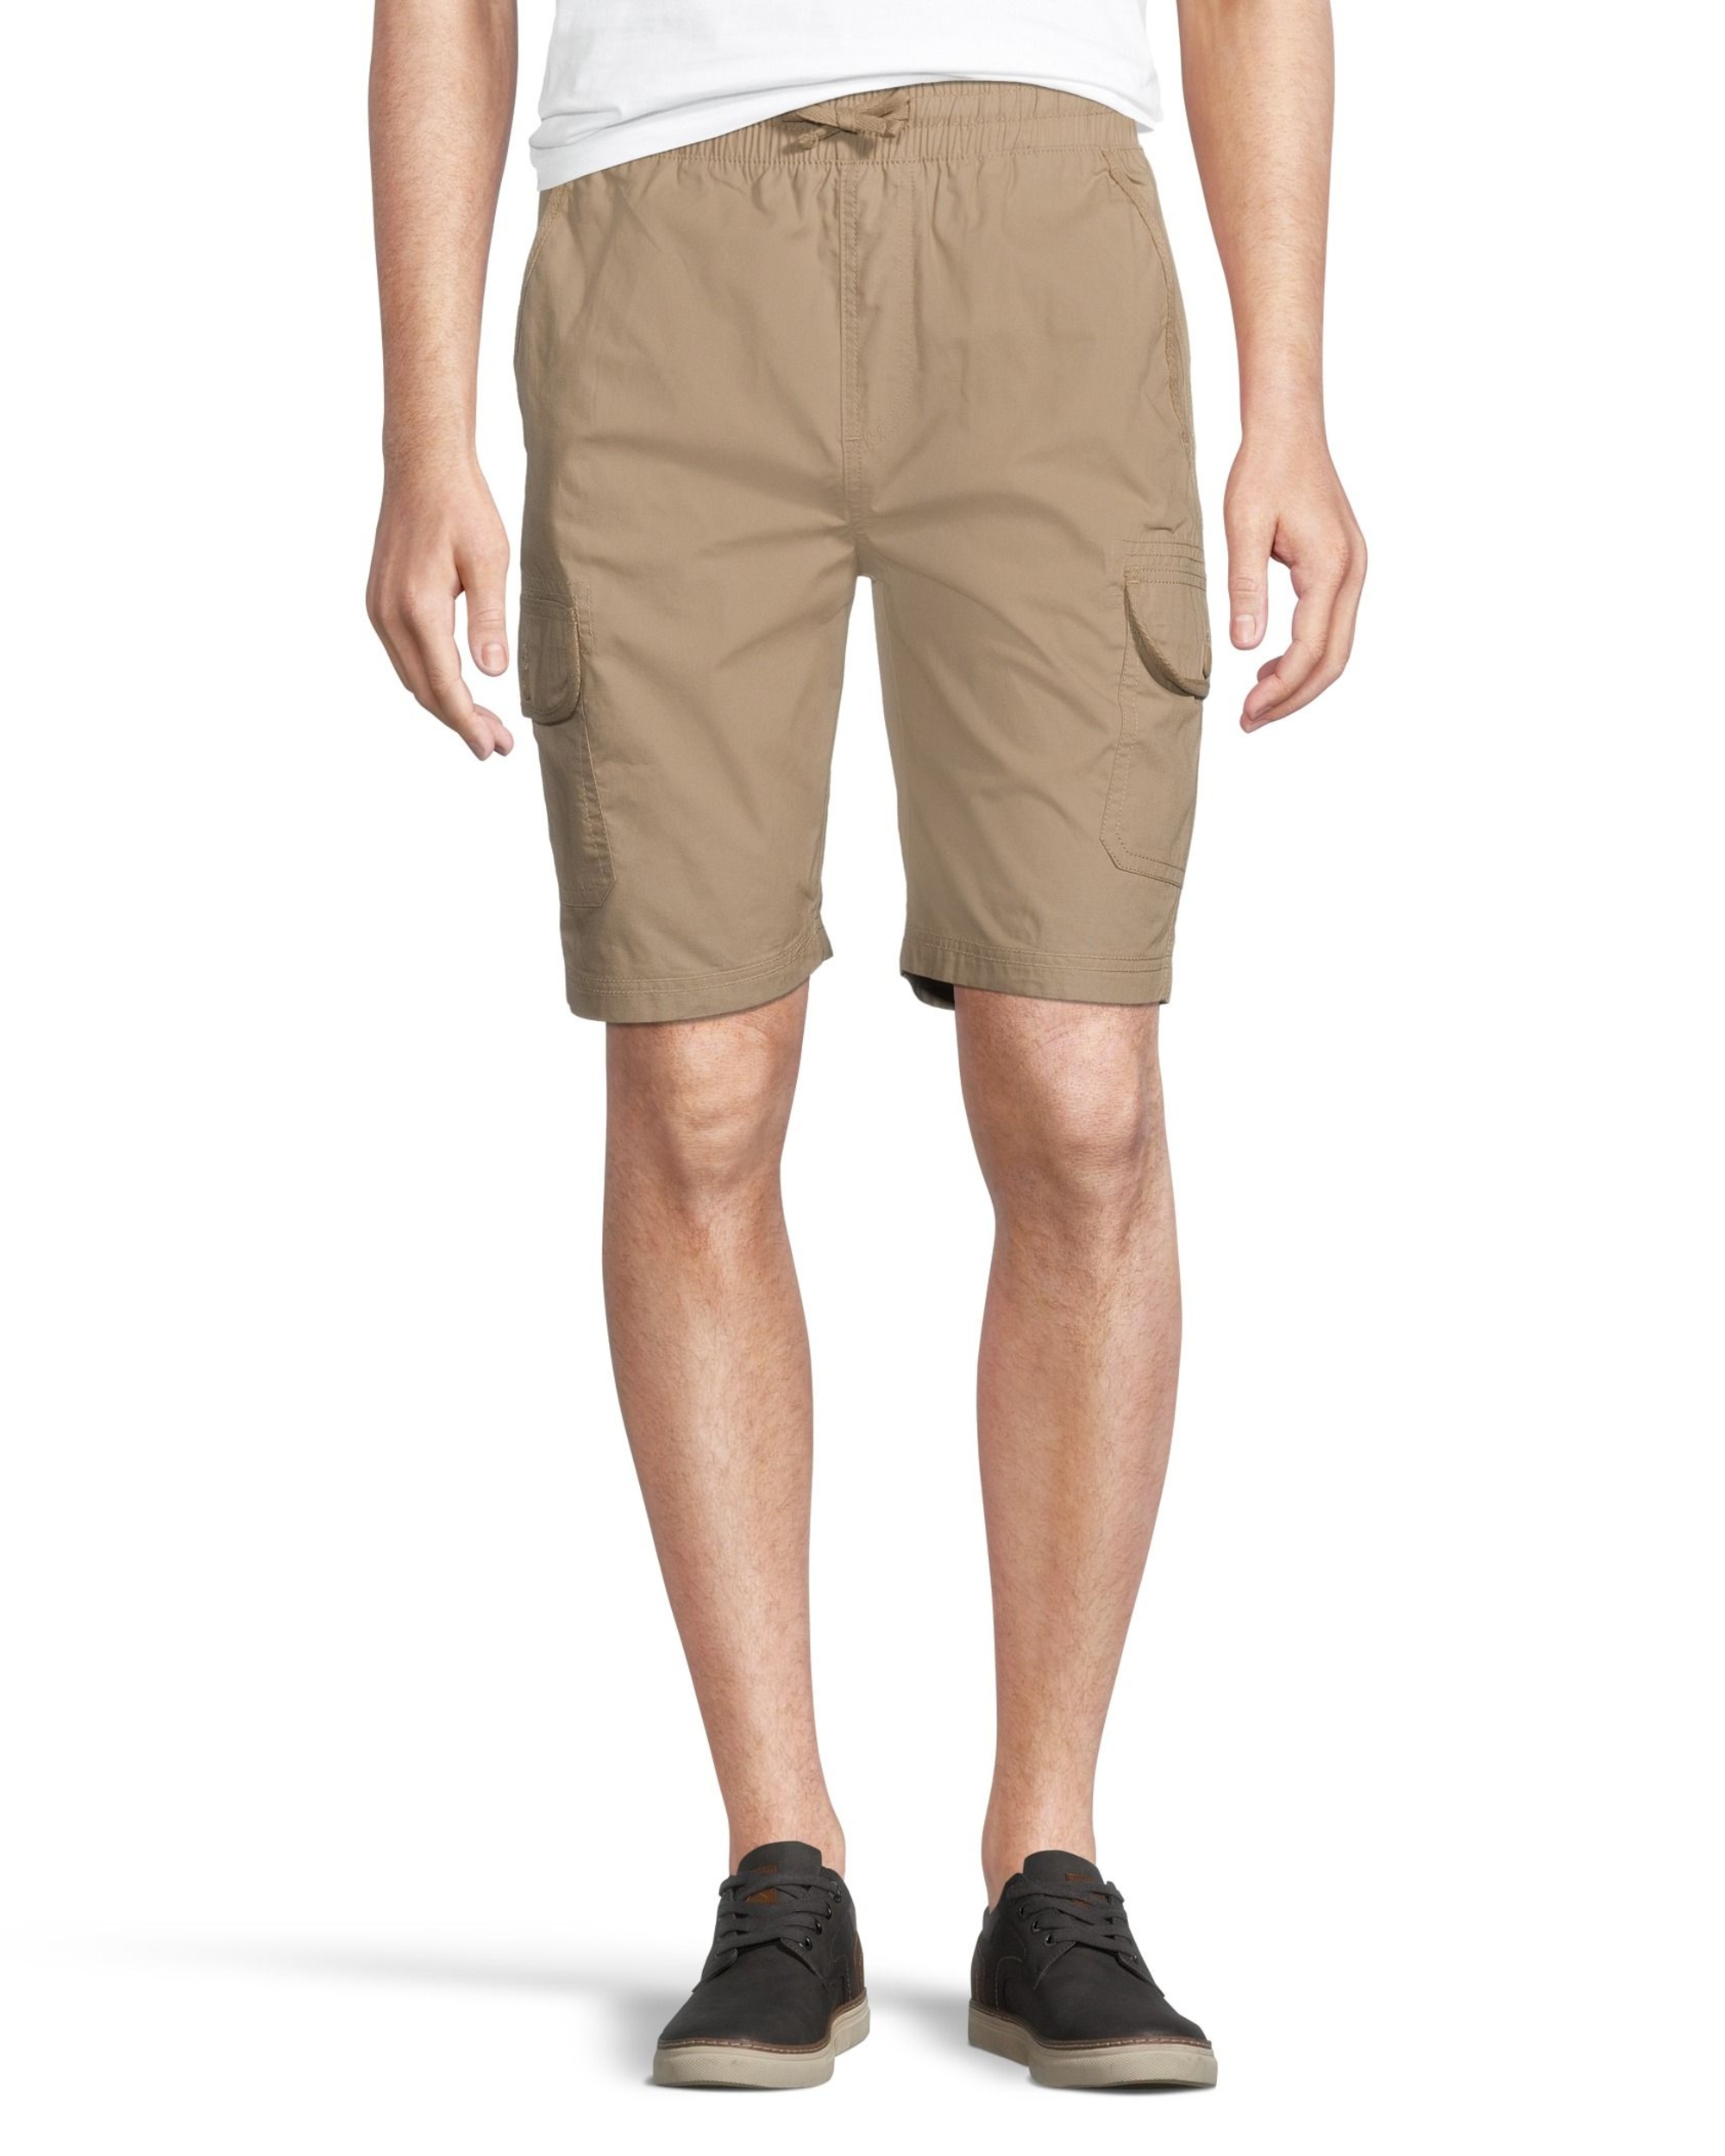 Civics Men's Mid Rise Relaxed Fit Cargo Cotton Shorts | Marks